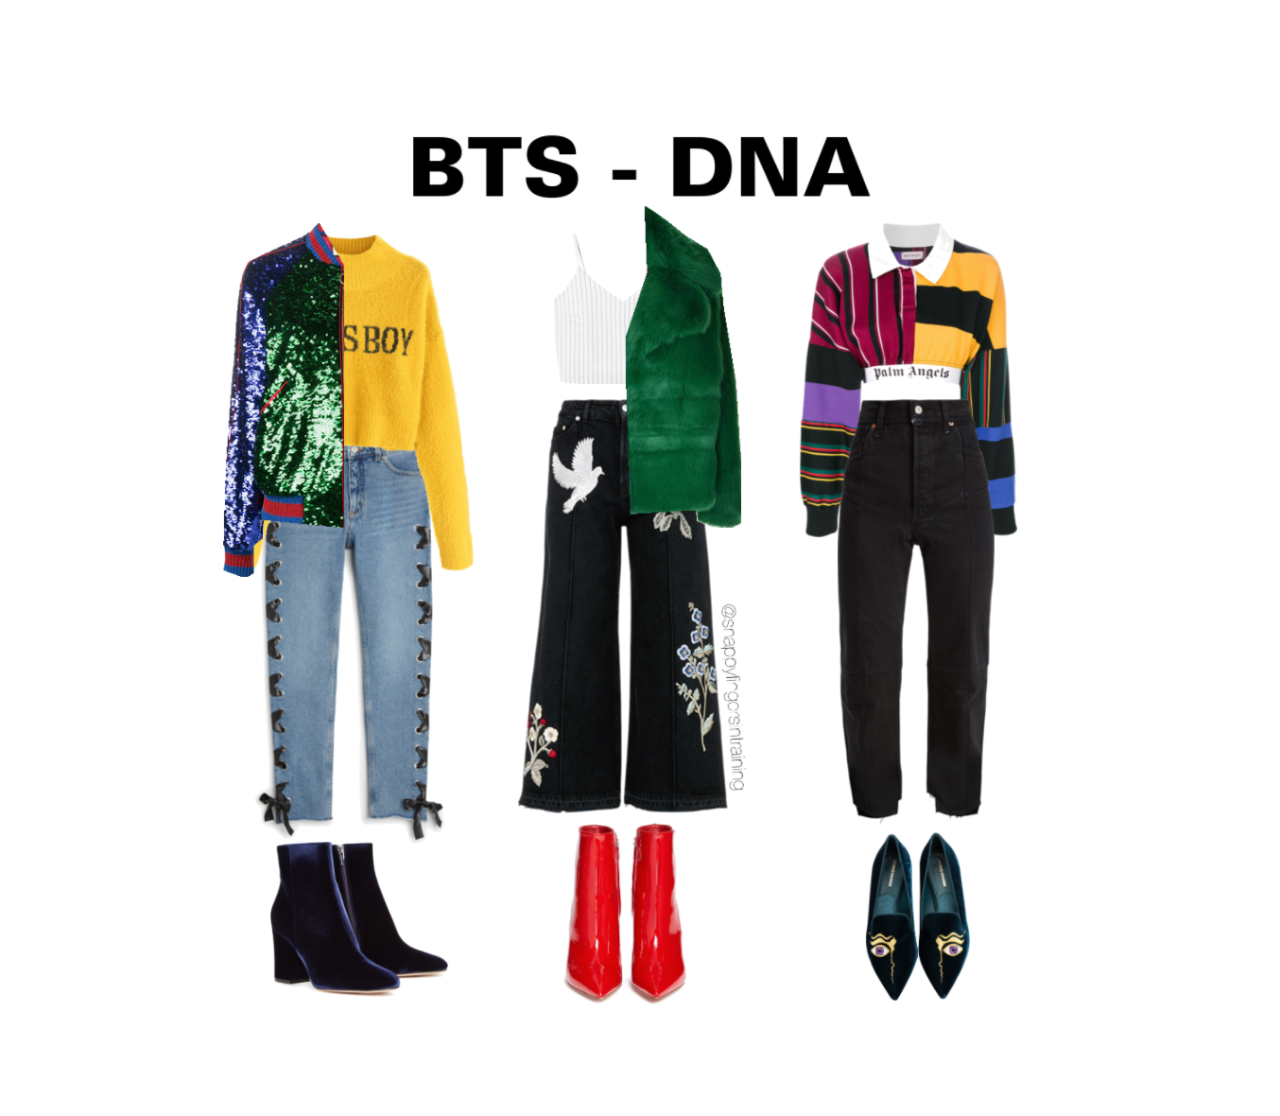 Kpop Outfits — BTS - DNA Inspired